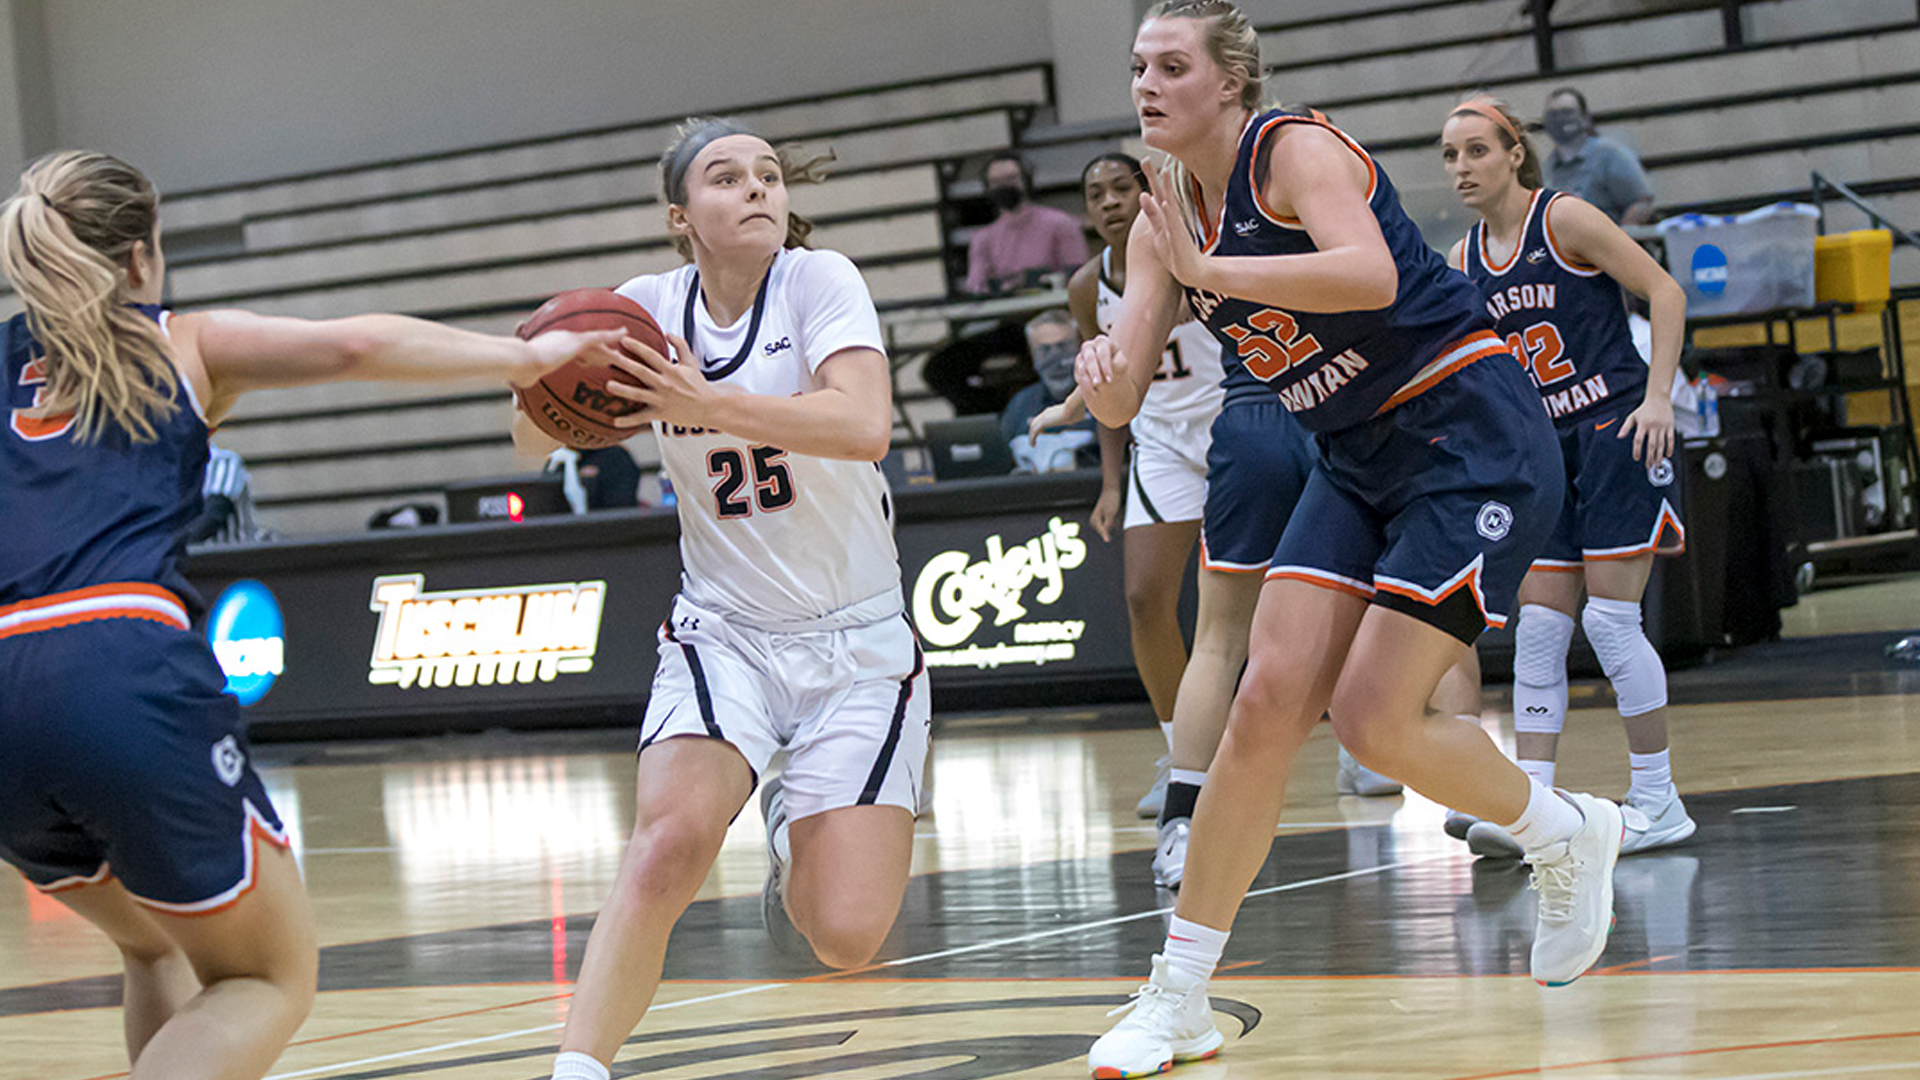 Maddie Sutton set a new Tusculum single-game record with 25 rebounds in TU's 69-66 double overtime loss to No. 20 Carson-Newman (photo by Chuck Williams)